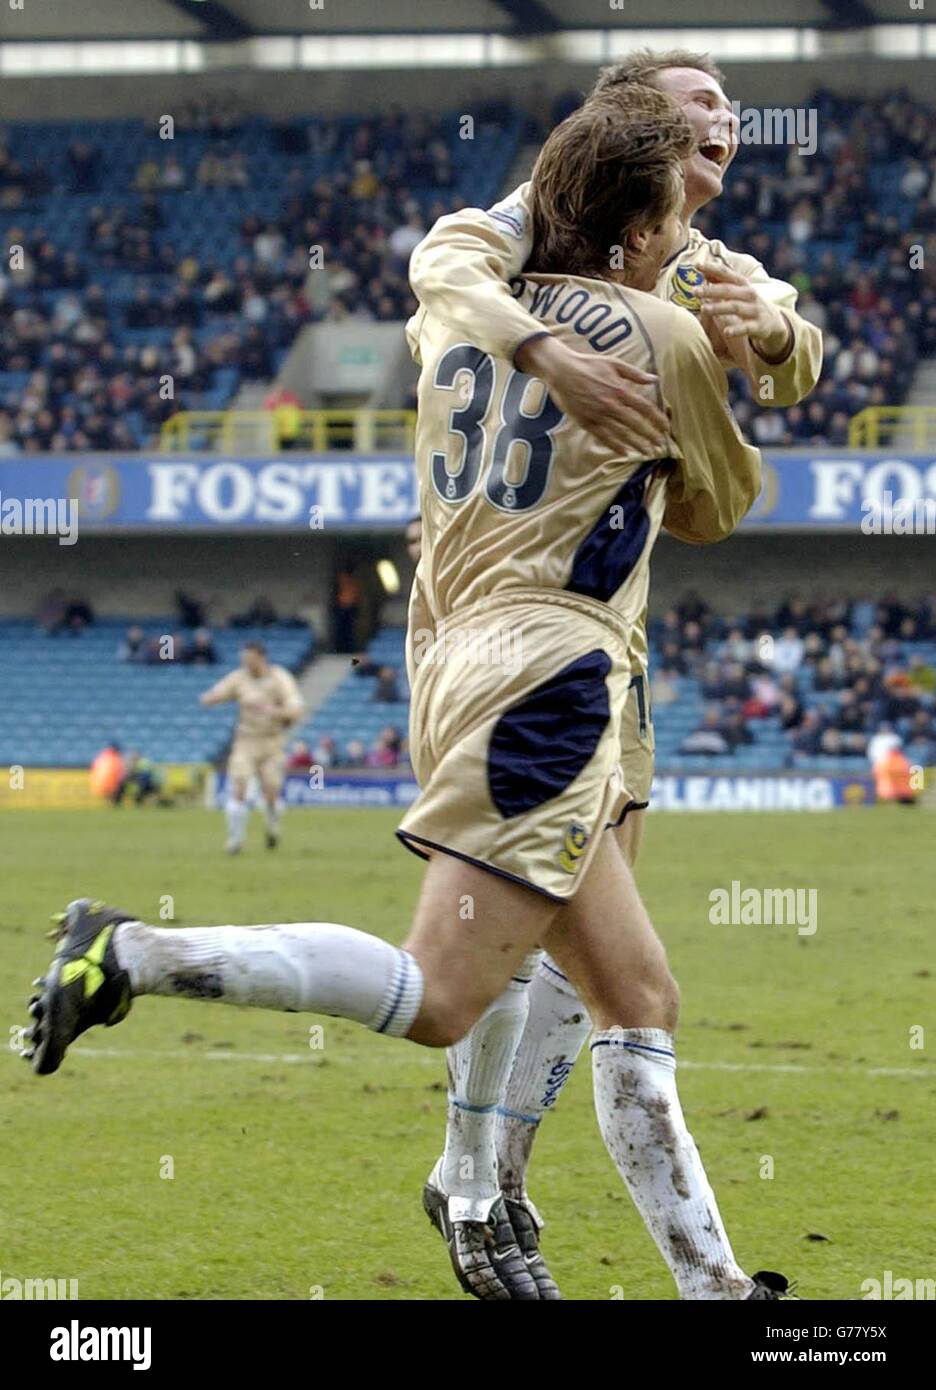 Portsmouth's Tim Sherwood (L) celebrates his side's third goal against Millwall with team-mate Matthew Taylor during the Nationwide Division One match at The Den, London. NO UNOFFICIAL CLUB WEBSITE USE. Stock Photo